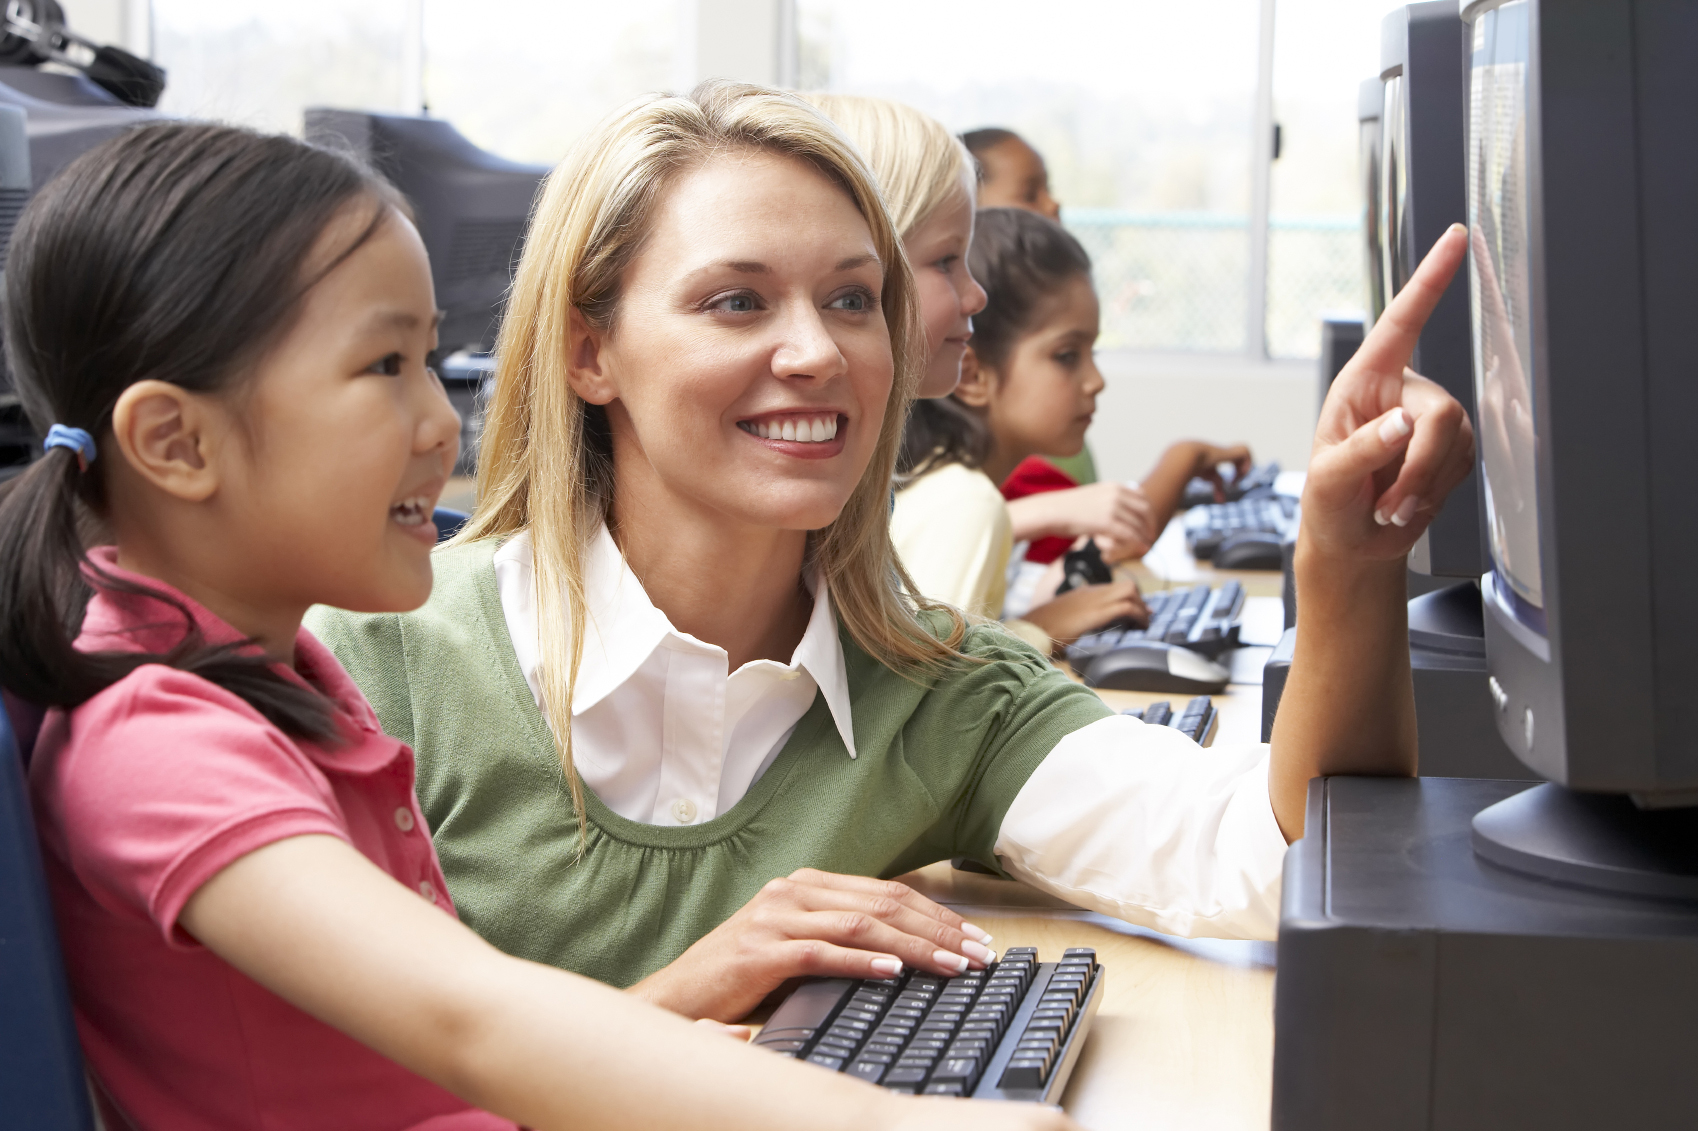 A female education major instructs a young girl working on a computer 